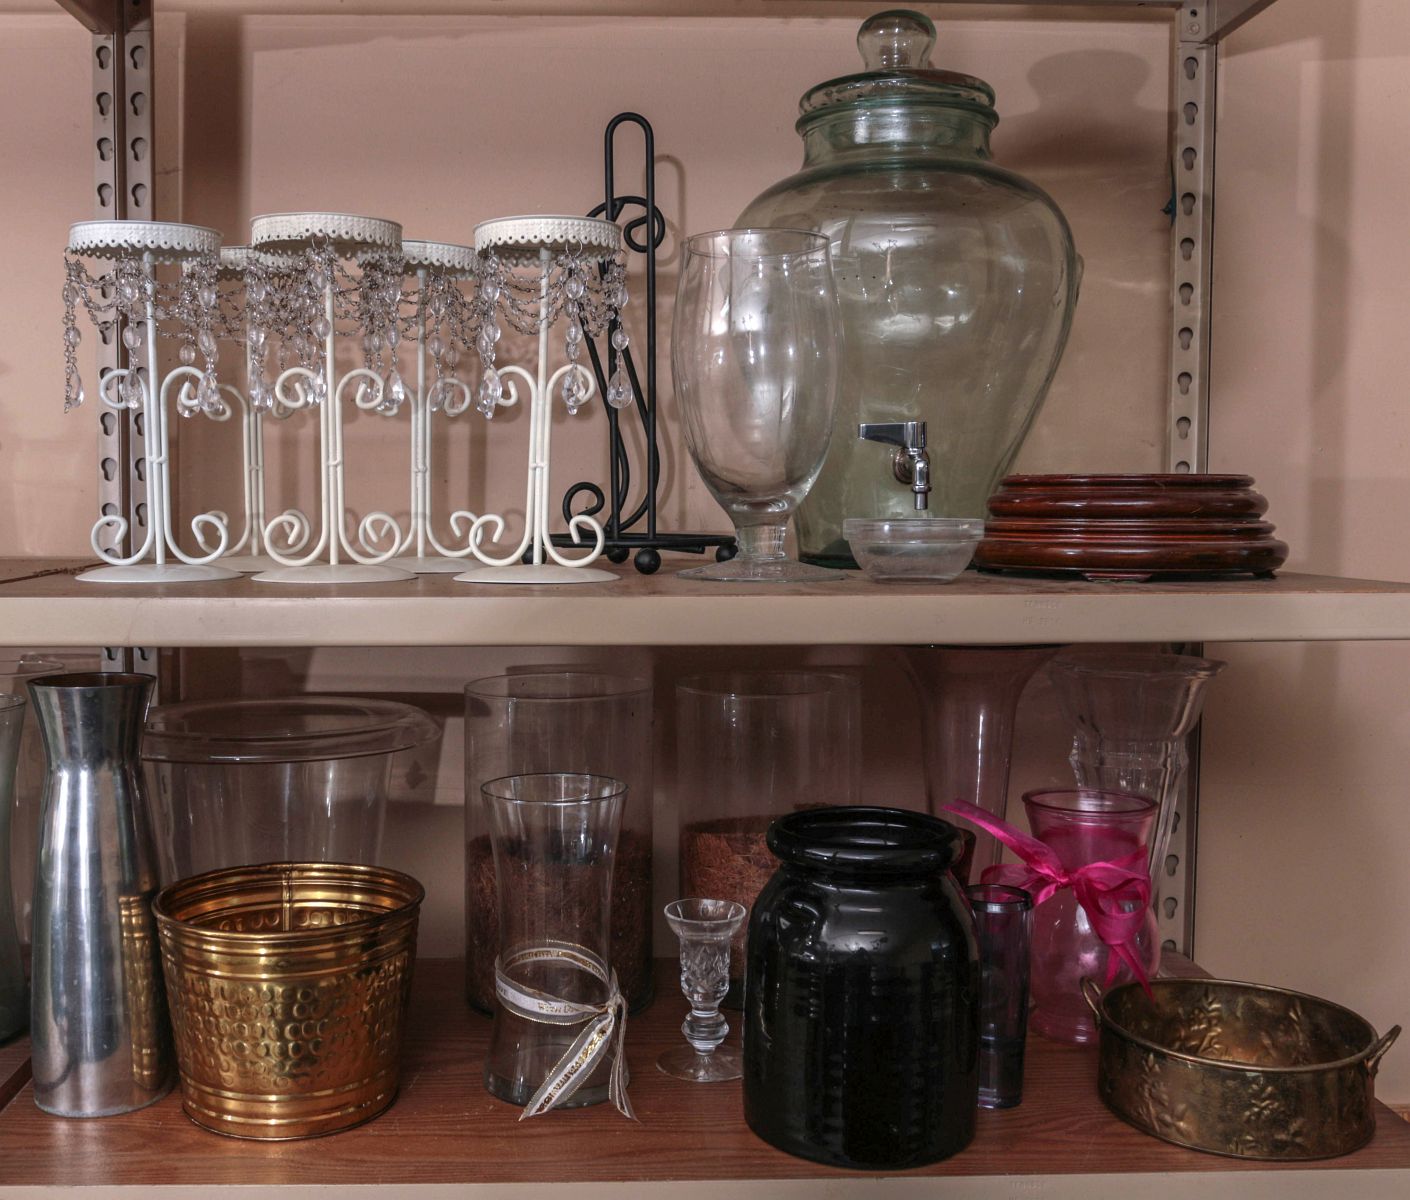 TWO SHELVES FILLED WITH MISCELLANEOUS